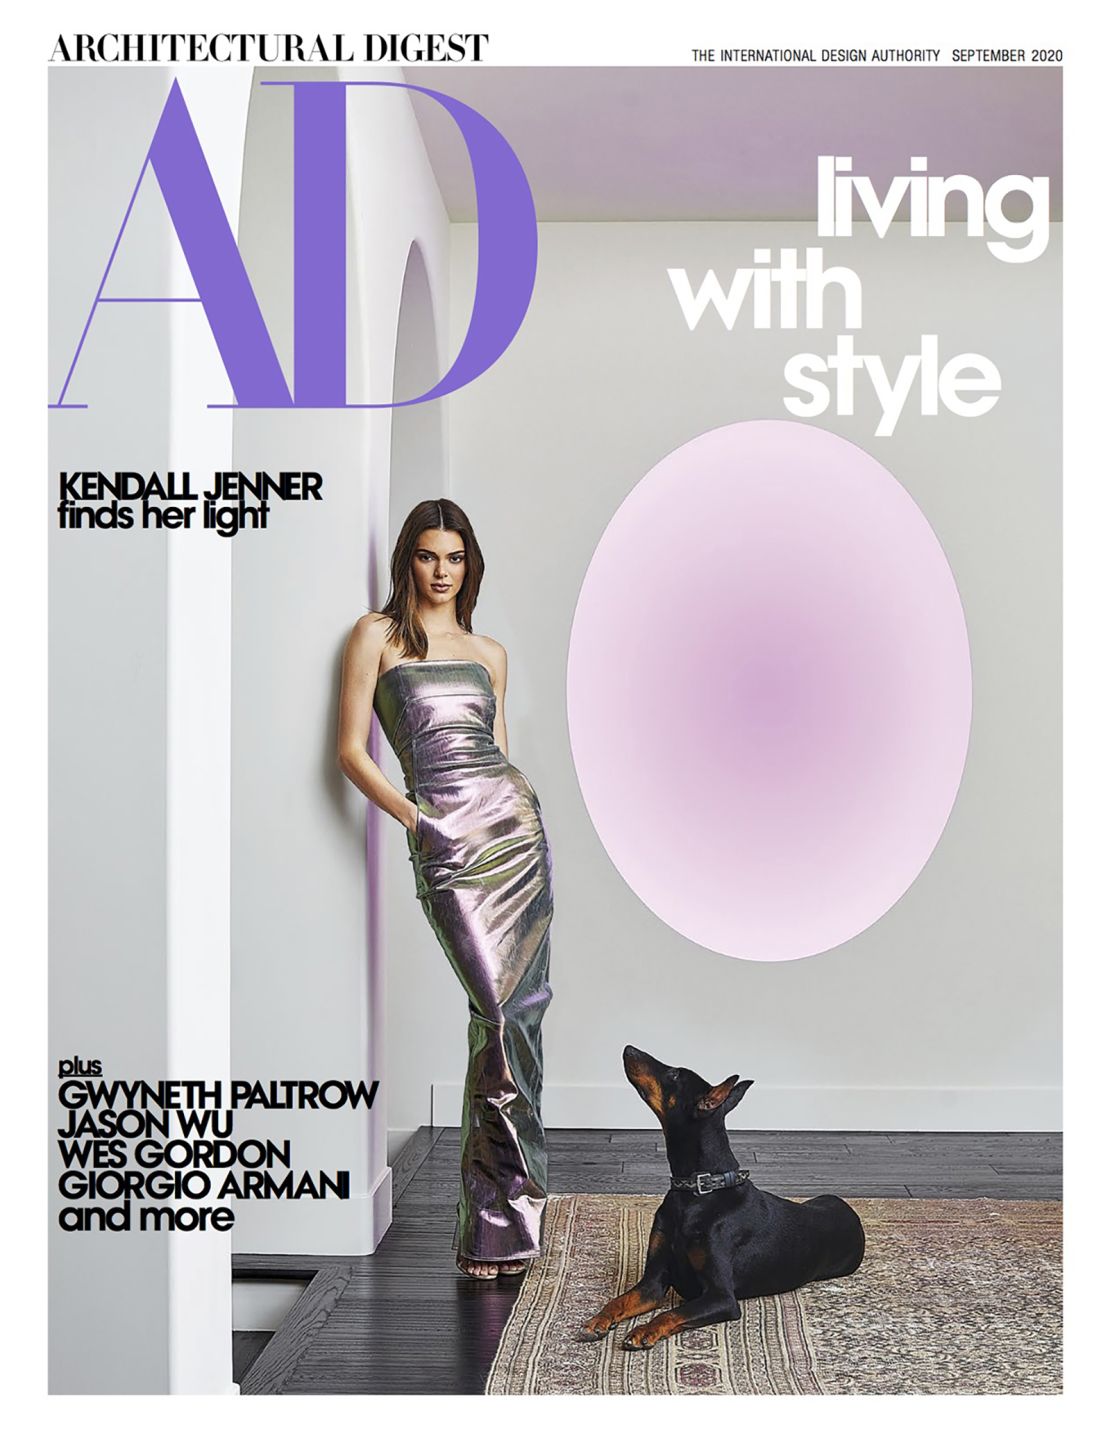 The cover of Architectural Digest's upcoming issue.